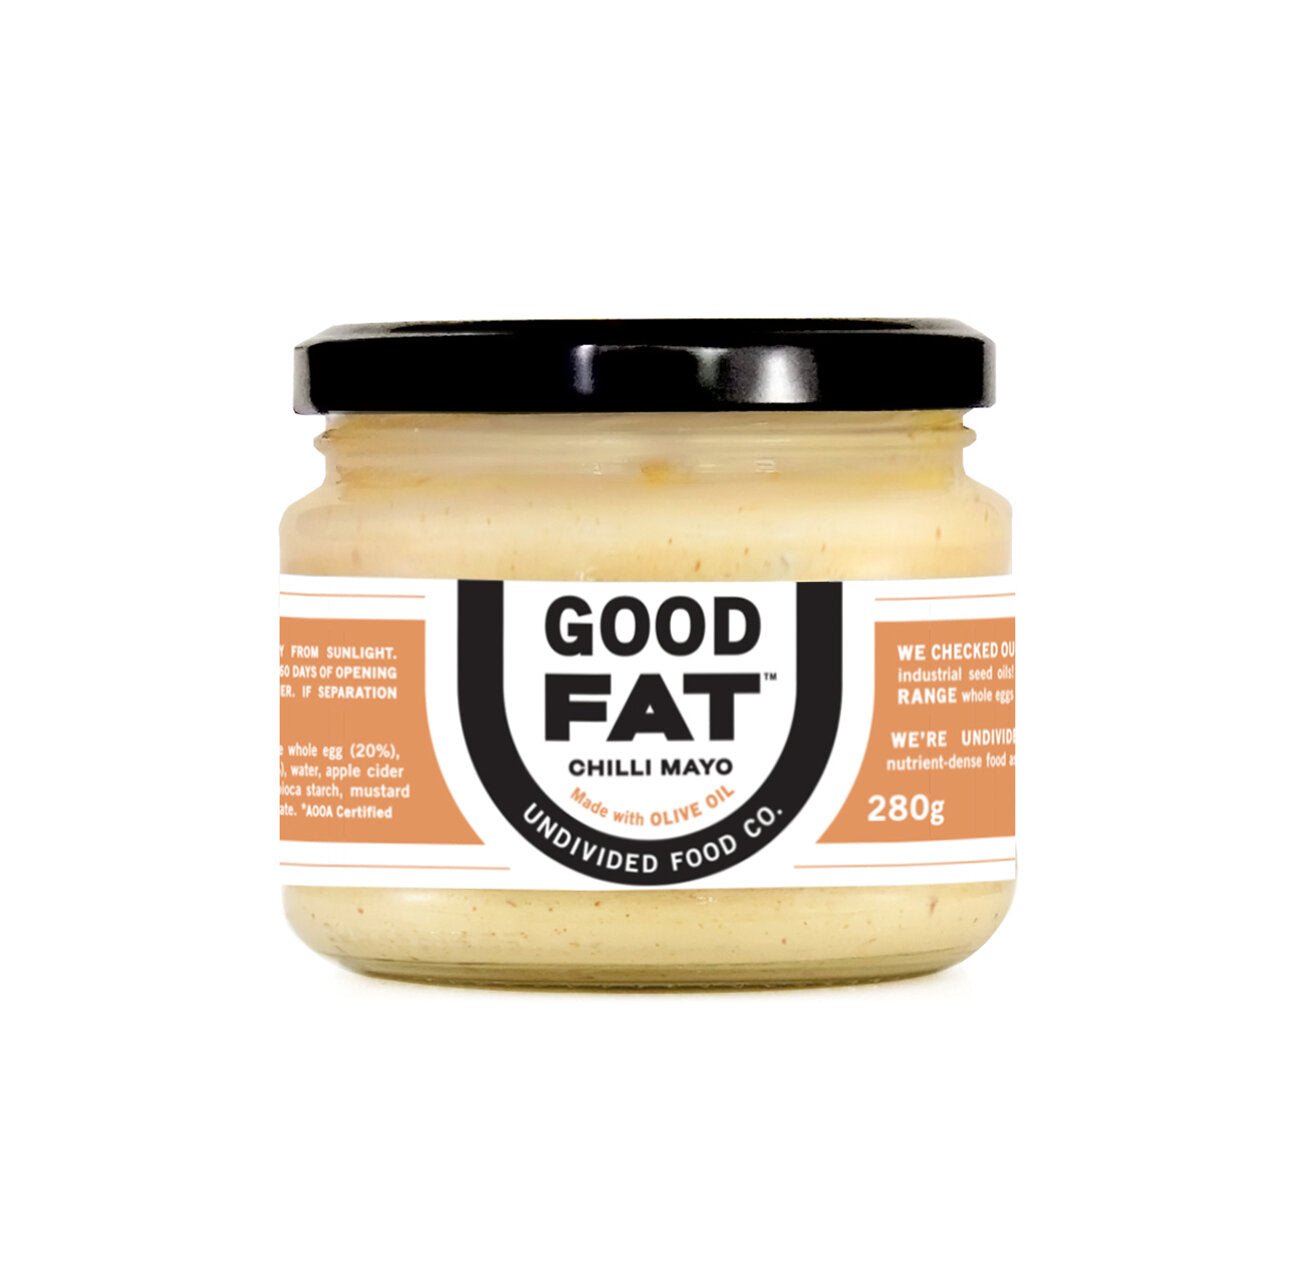 GOOD FAT™ Chilli Mayo Made with Olive Oil, Free Range Whole Eggs & Australian Chillies - #shop_name - -Undivided food co